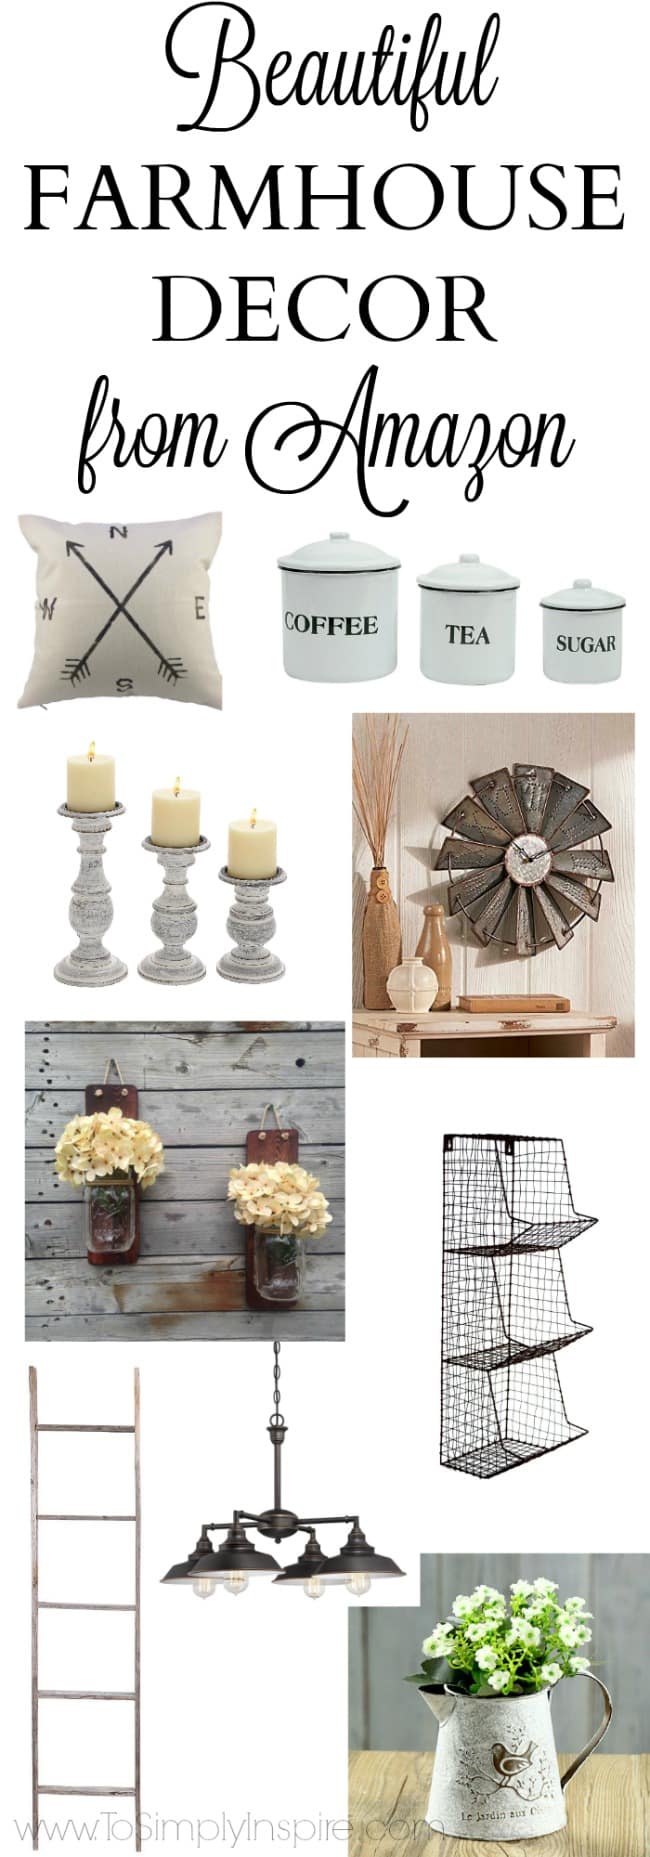 several pieces of farmhouse decor - candlesticks, canisters, pillow, cream hydrangea flowers